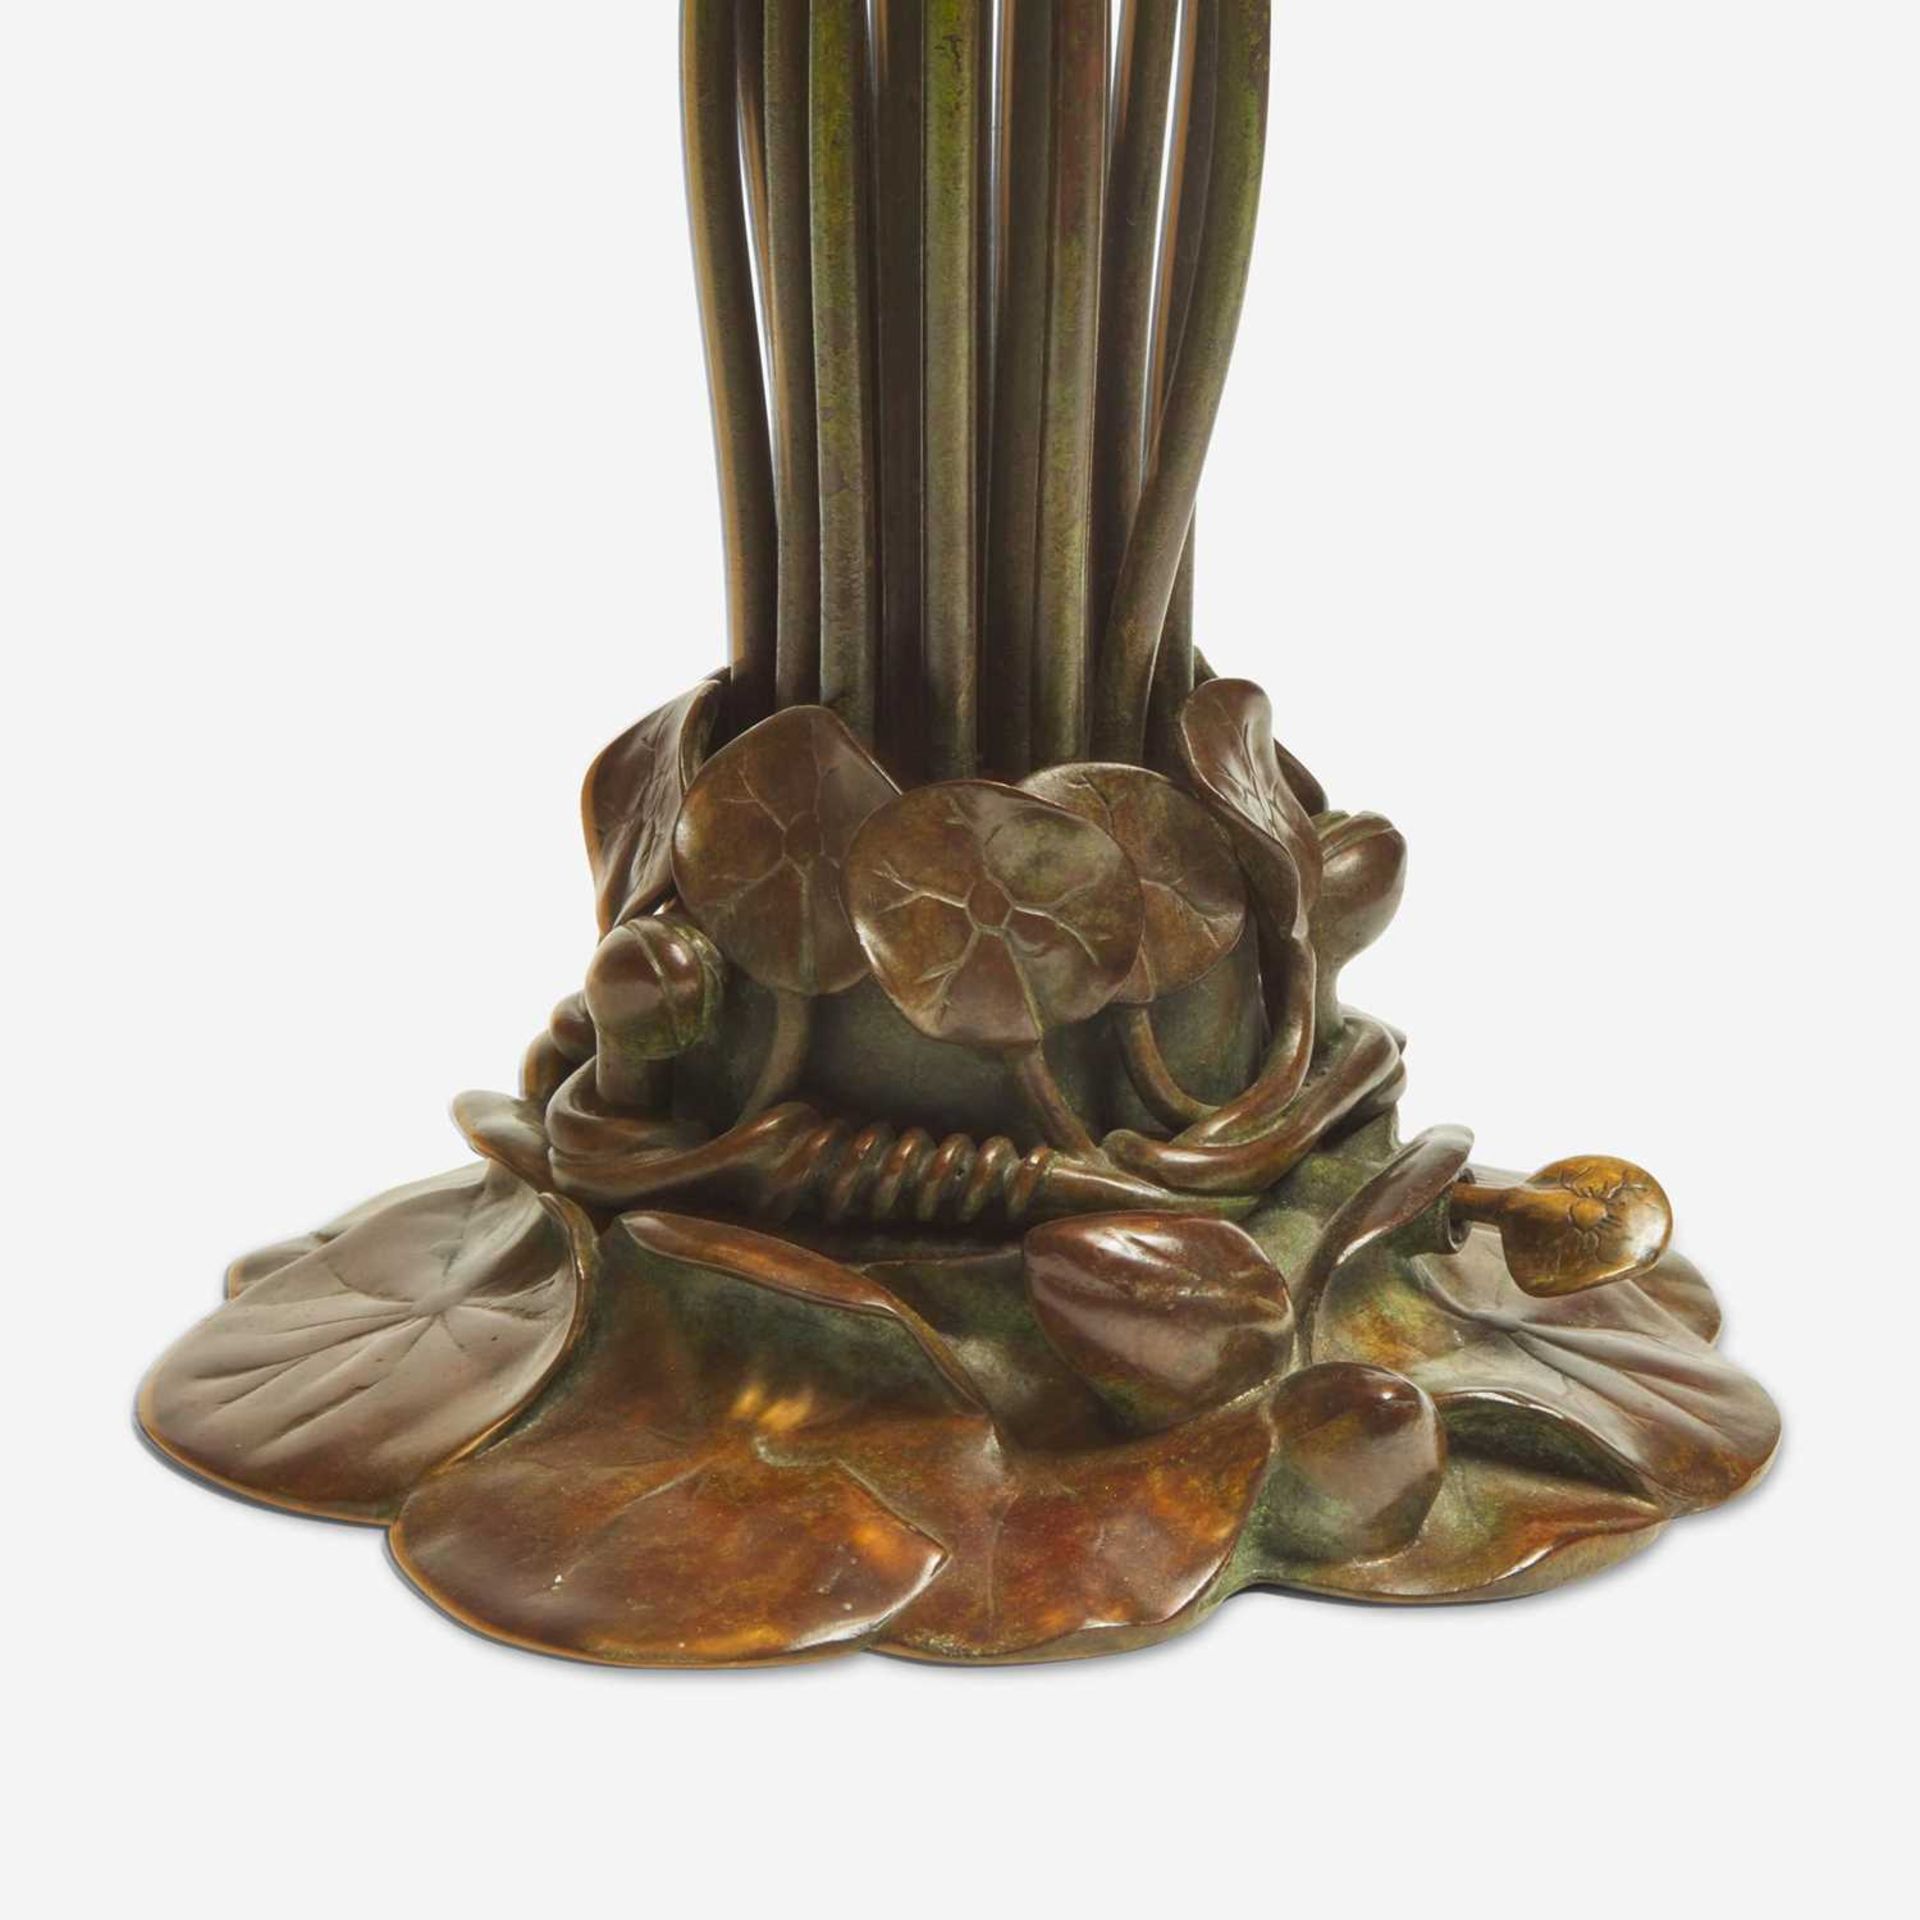 Tiffany Studios (American, active 1878-1932) An Eighteen-Light "Lily" Table Lamp, New York, NY, - Image 3 of 3